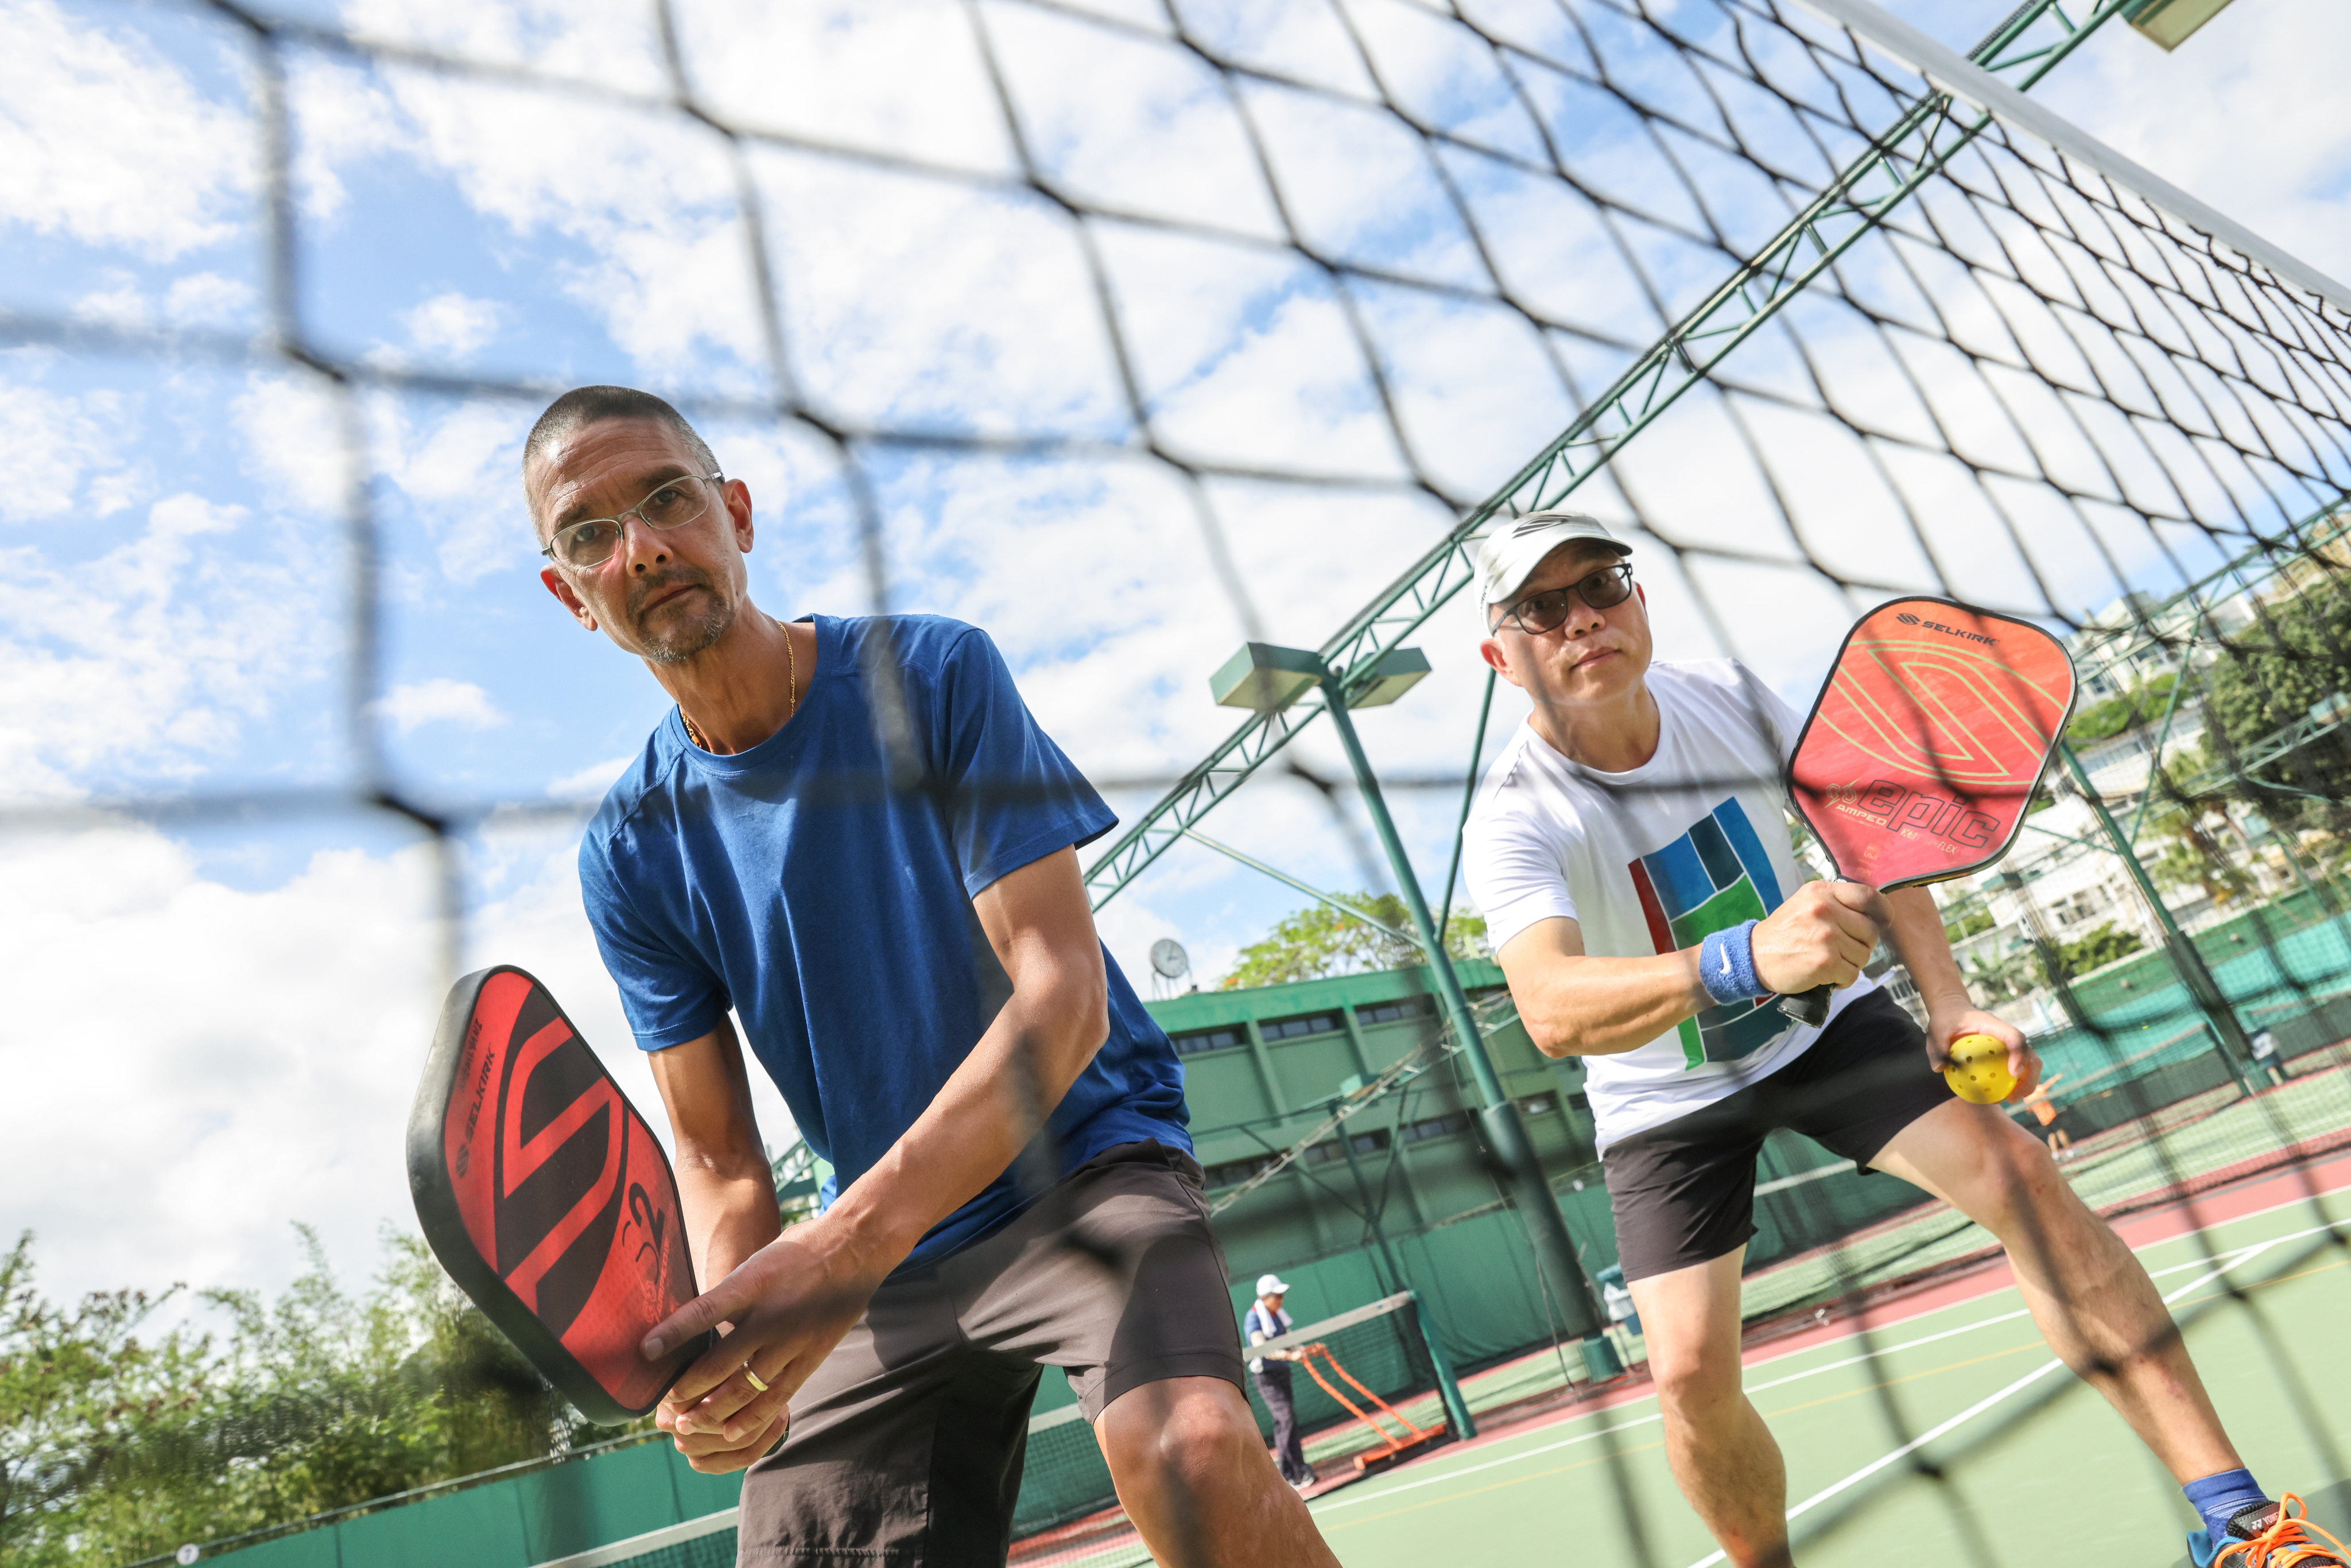 Rajan Khemlyani (left) and David Wong (right) playing pickleball at Hong Kong Country Club in Deep Water Bay. Pickleball is the fastest growing sport in North America and it has arrived in Hong Kong. Photo: May Tse